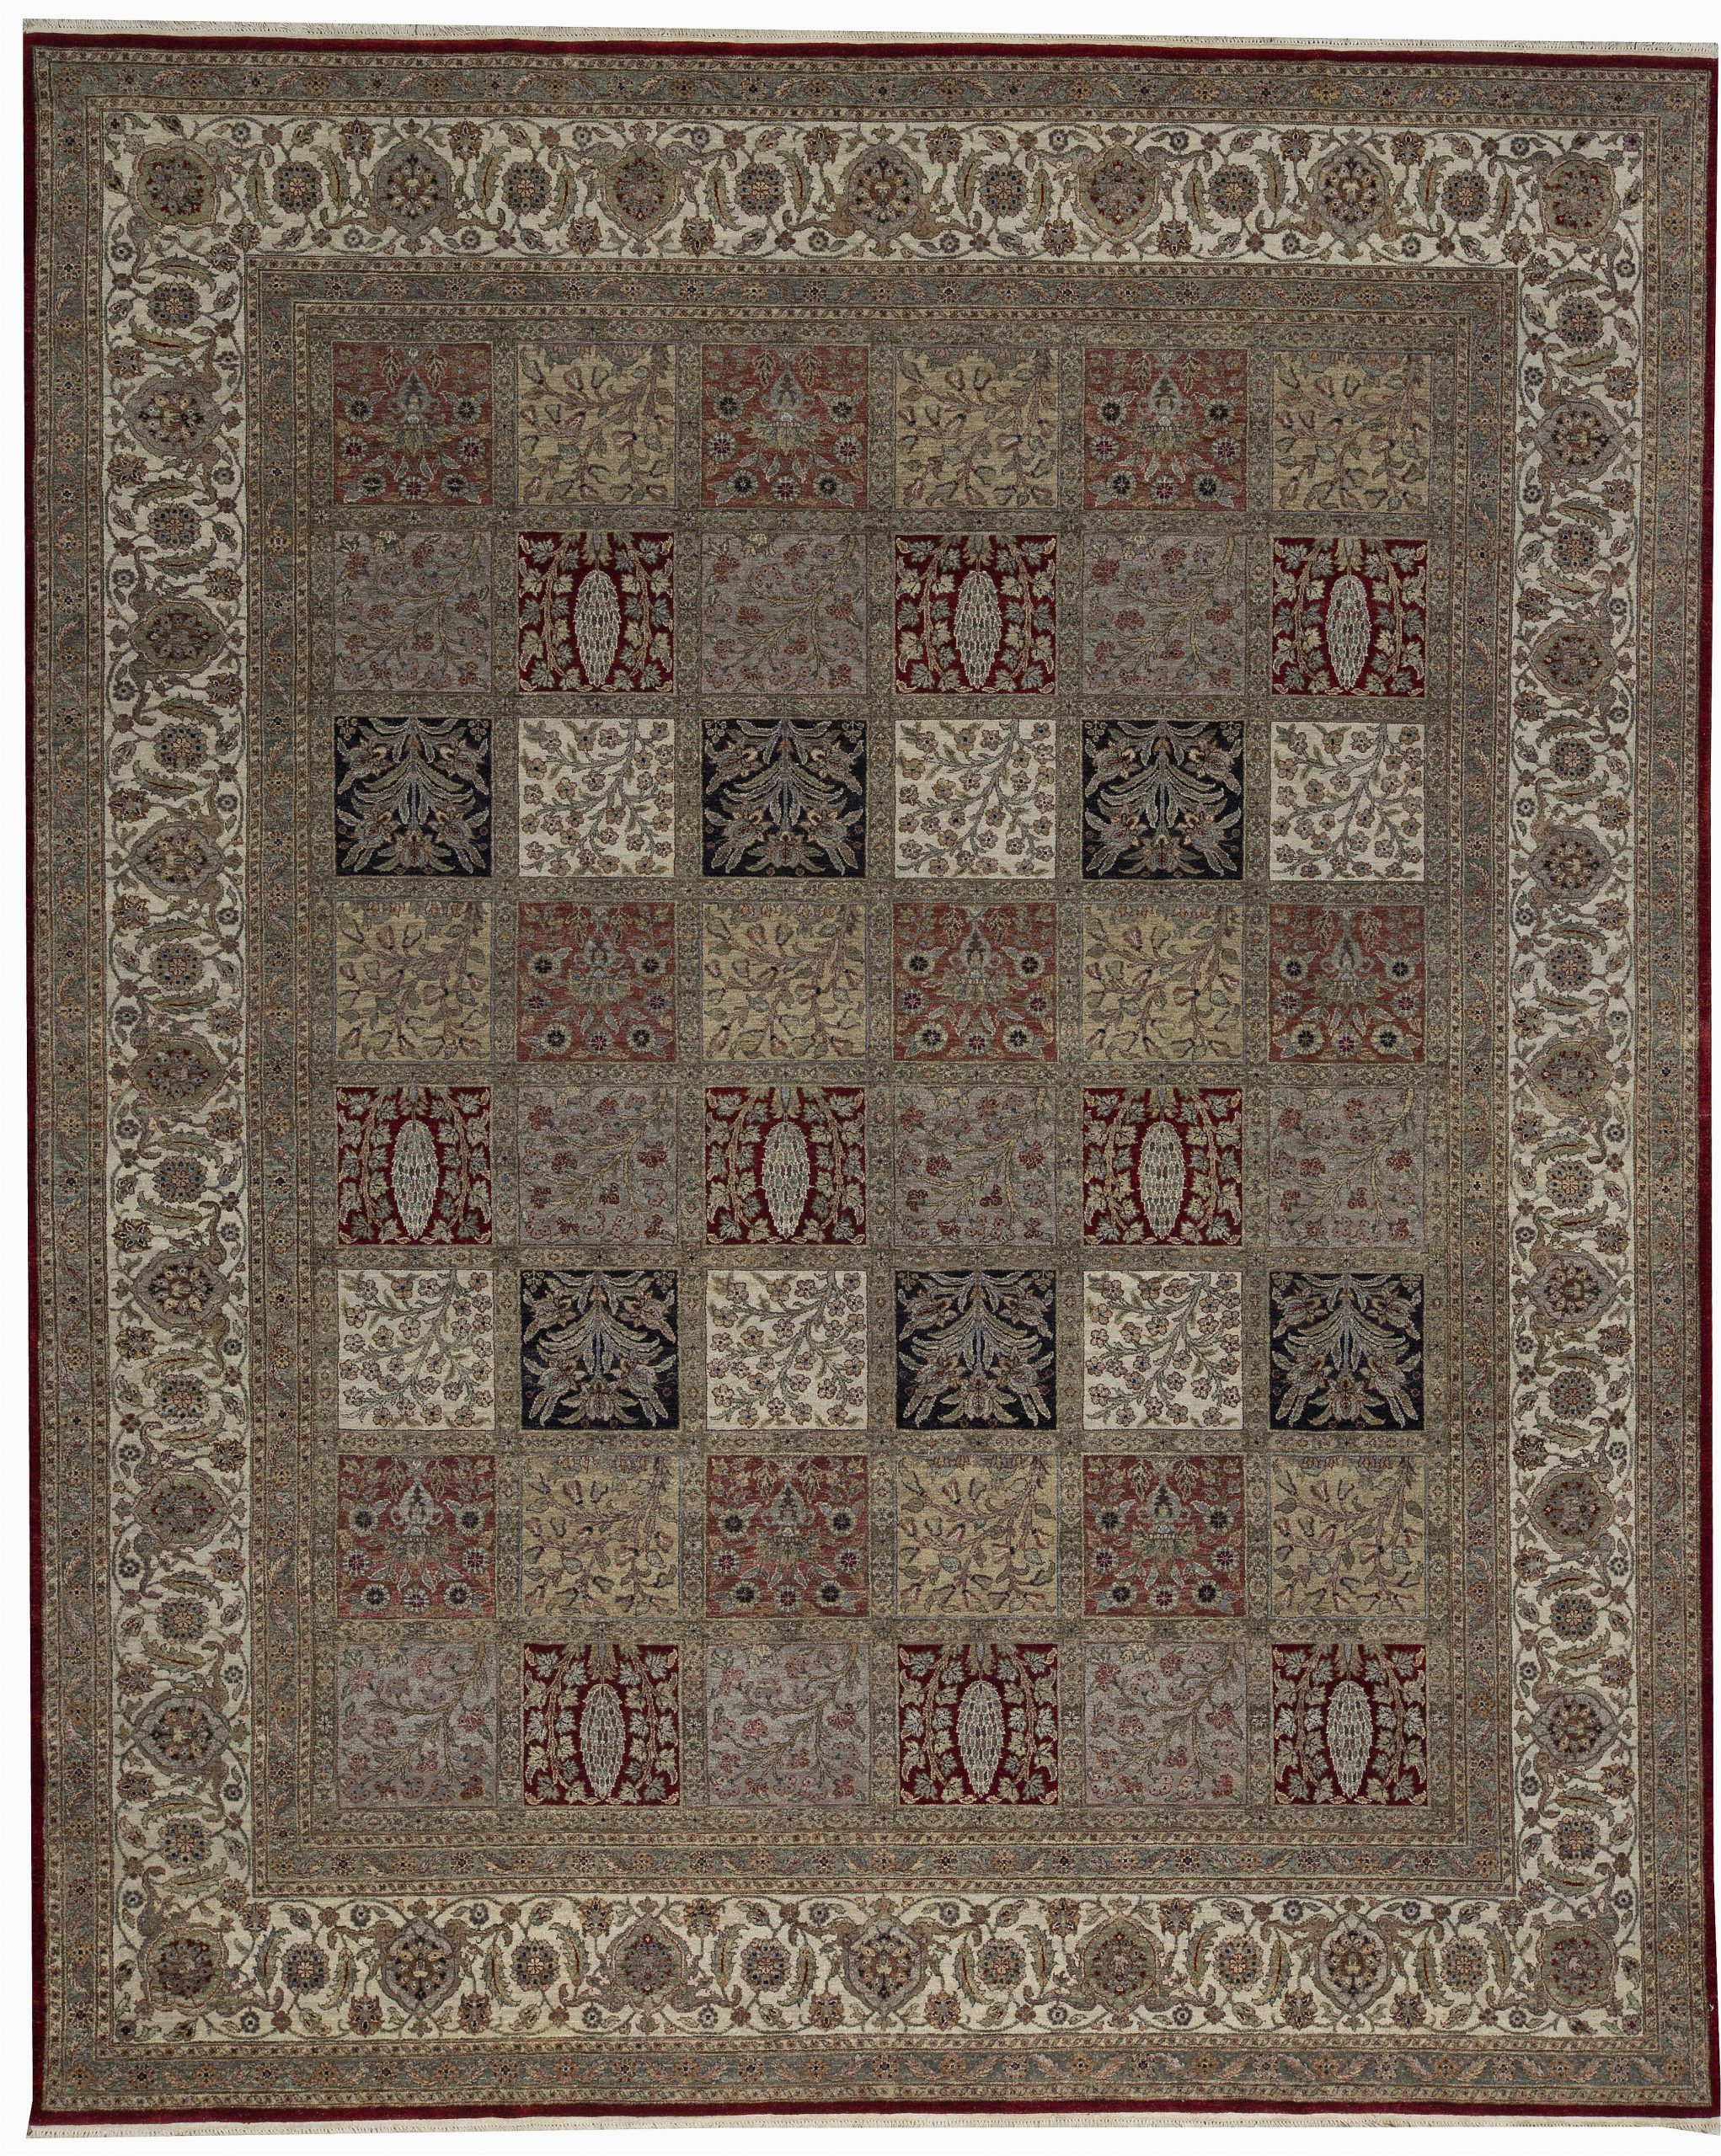 7 by 12 area Rug E Of A Kind Mountain King Handwoven 12 X 14 7" Wool Gray area Rug